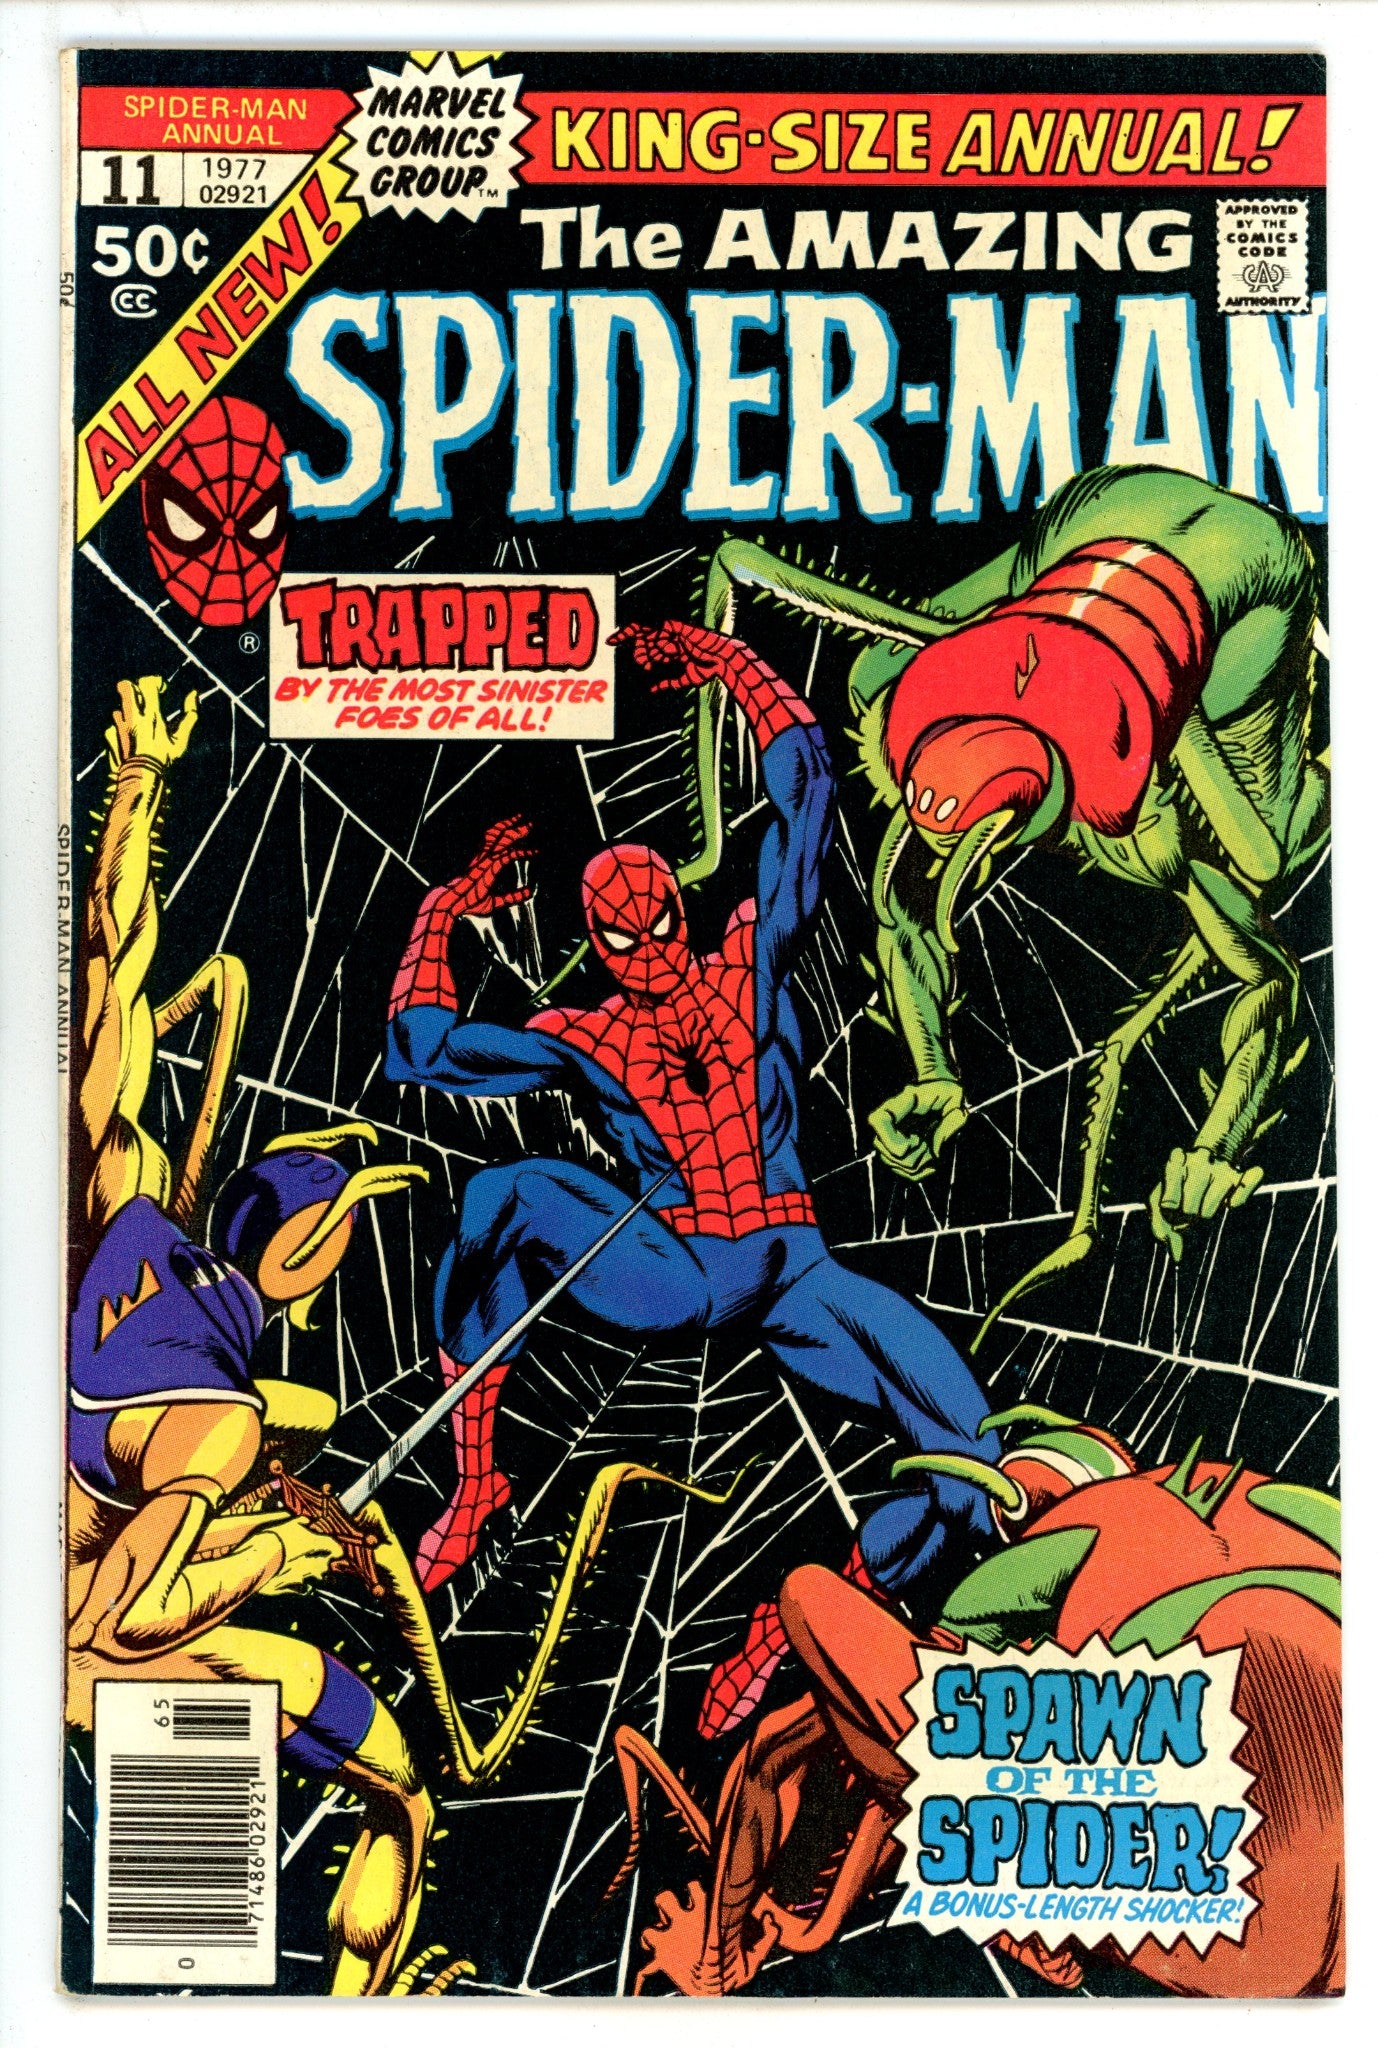 The Amazing Spider-Man Annual Vol 1 11 FN (6.0) (1977) 